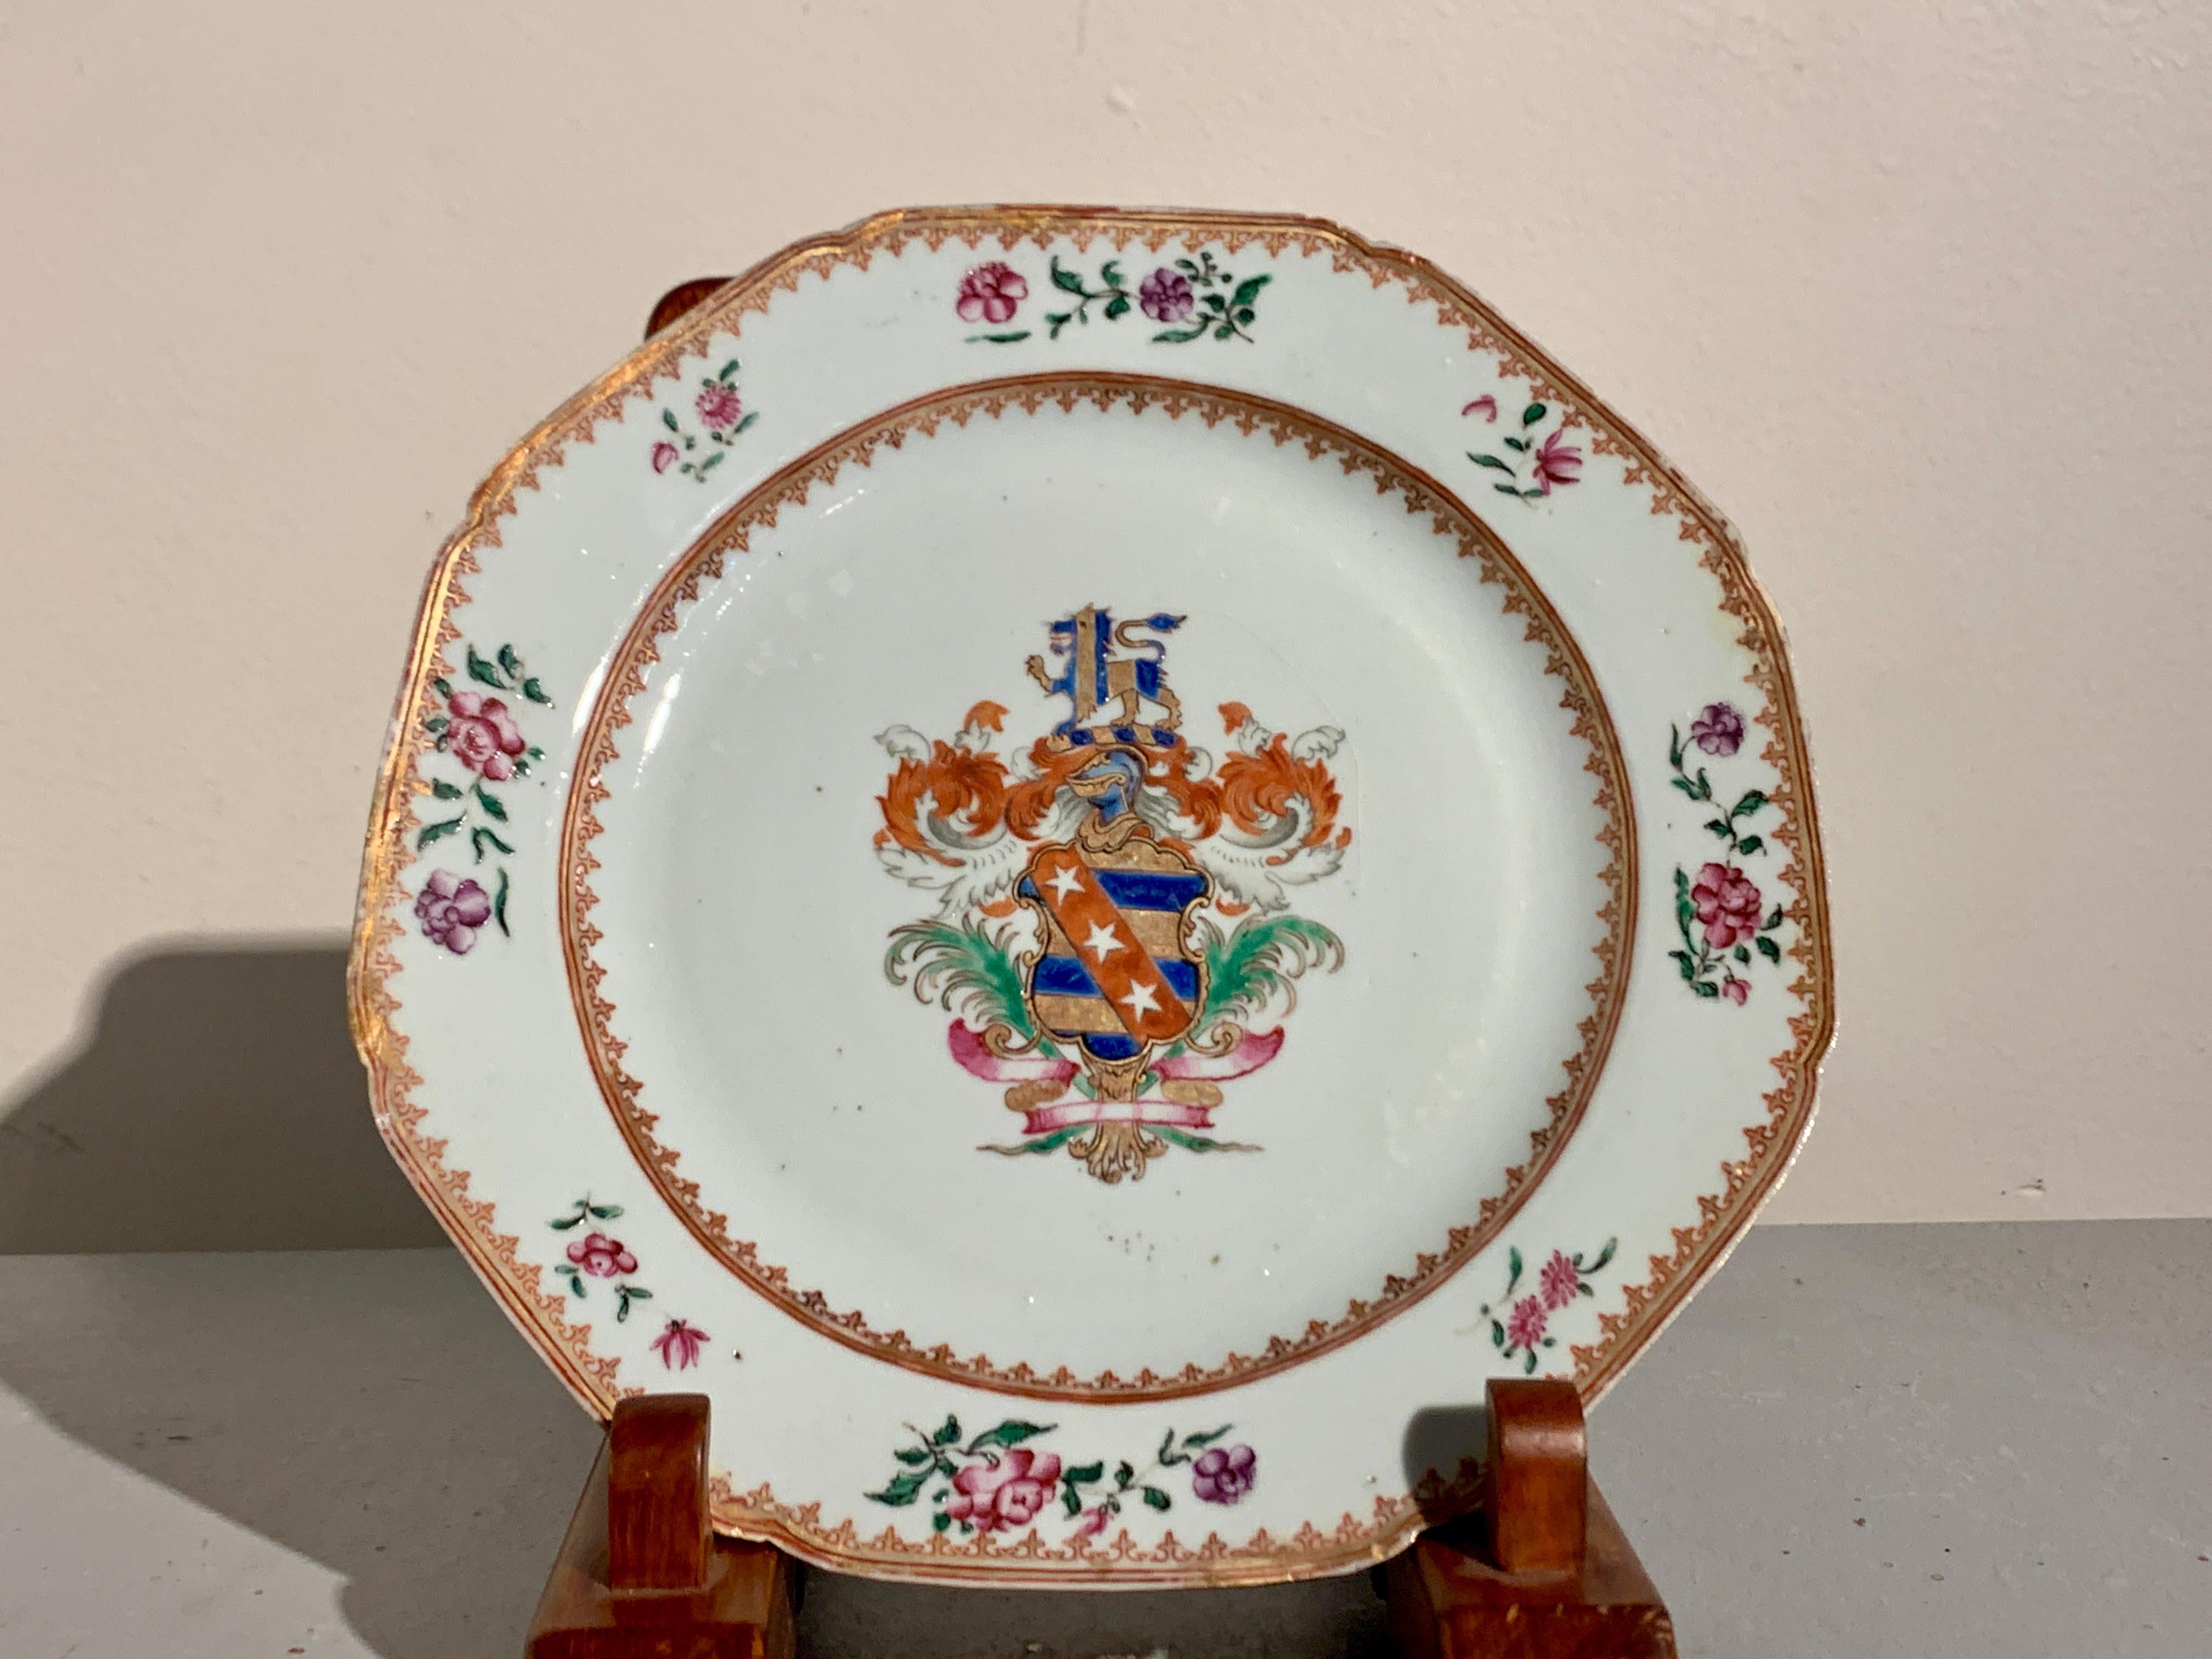 A lovely pair of Chinese export famille rose enameled porcelain armorial plates, mid 18th century, China.

The plates of unusual octagonal form with scalloped corners. The center of each dish painted with a large armorial design based on the